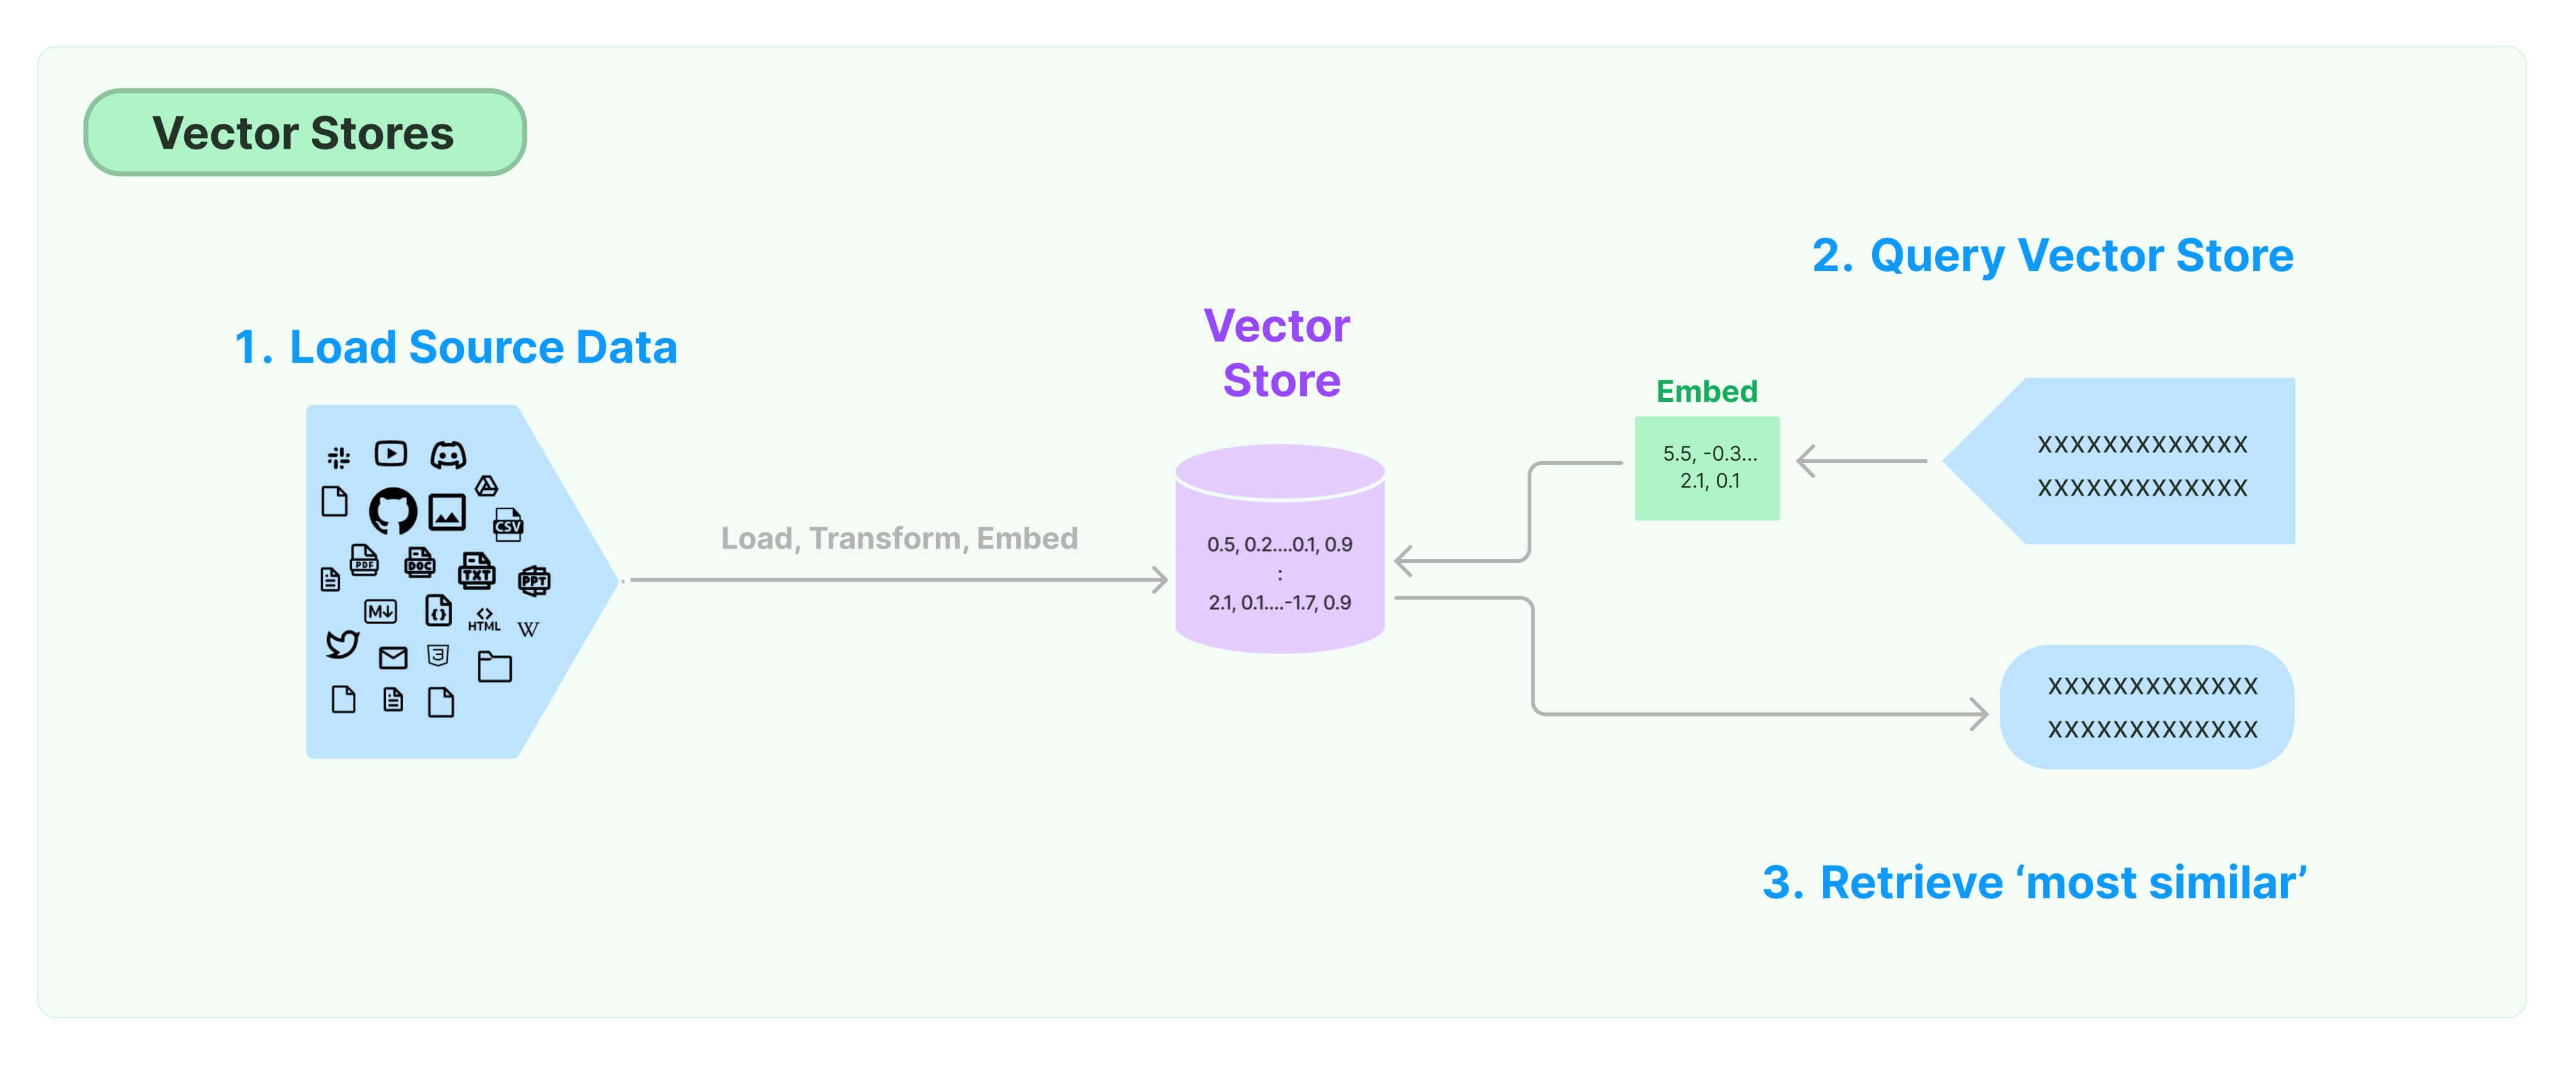 Diagram illustrating the process of vector stores: 1. Load source data, 2. Query vector store, 3. Retrieve &#39;most similar&#39; results.